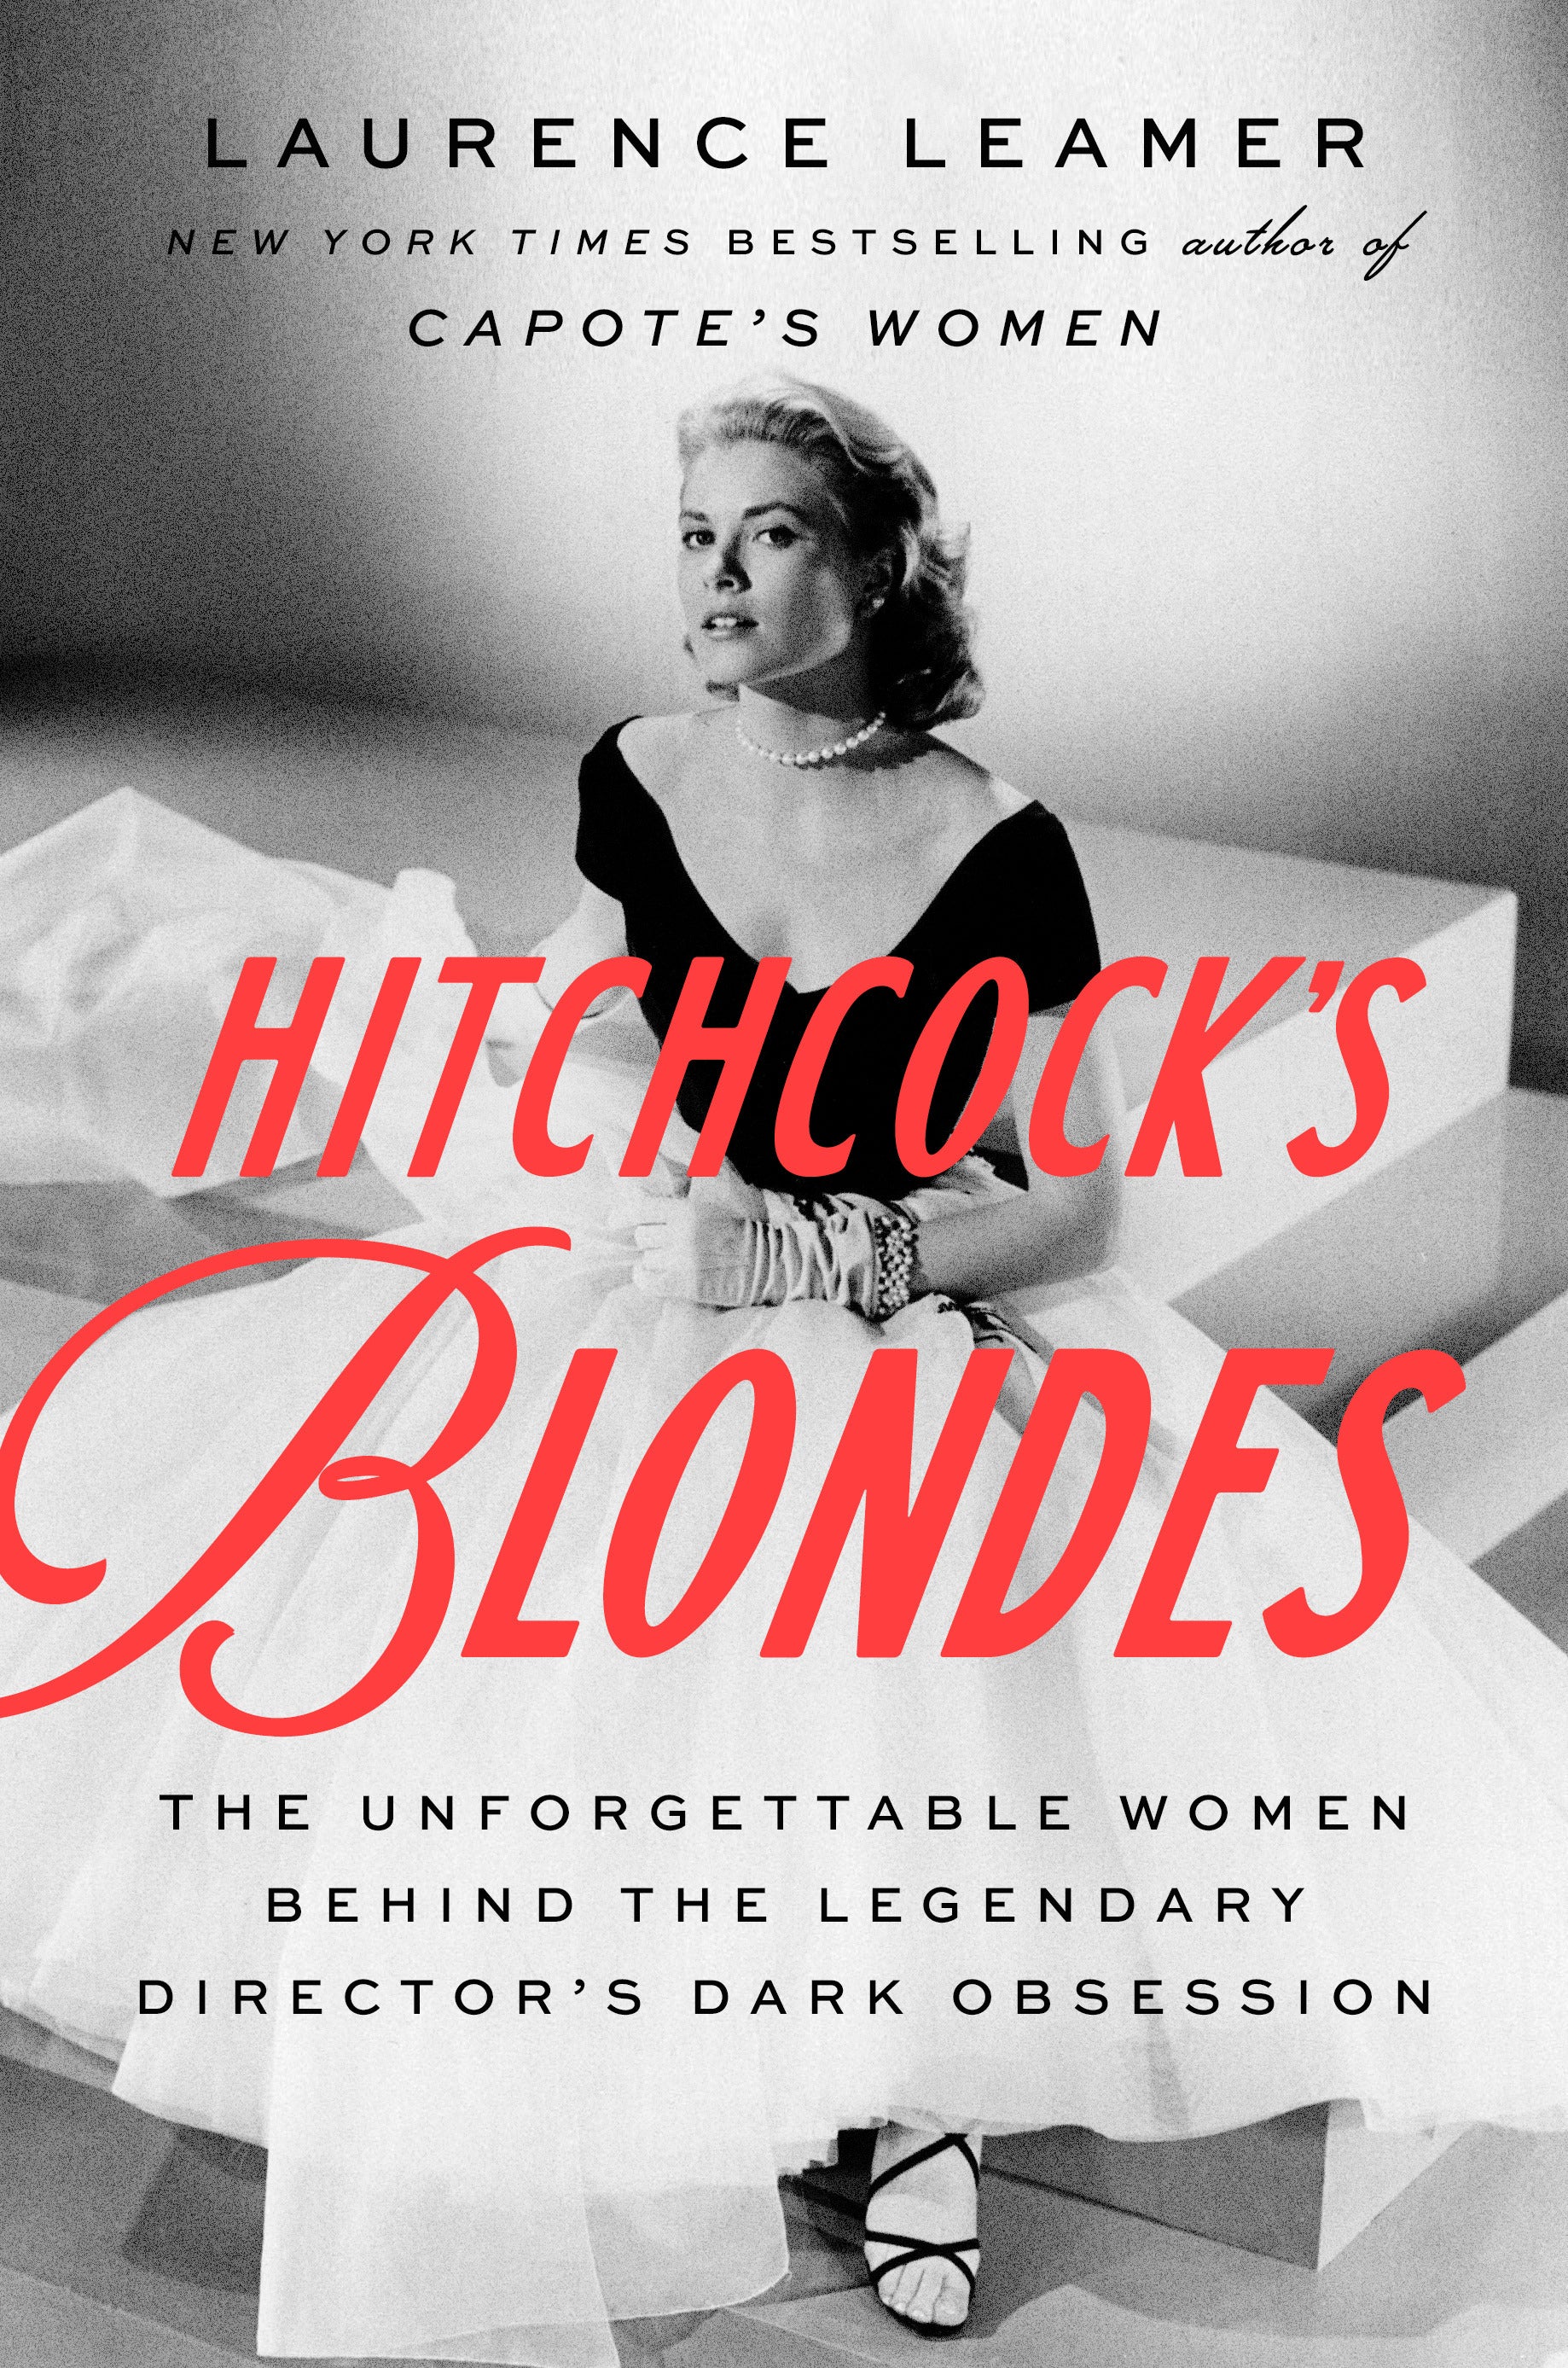 Book Review - Hitchcock's Blondes